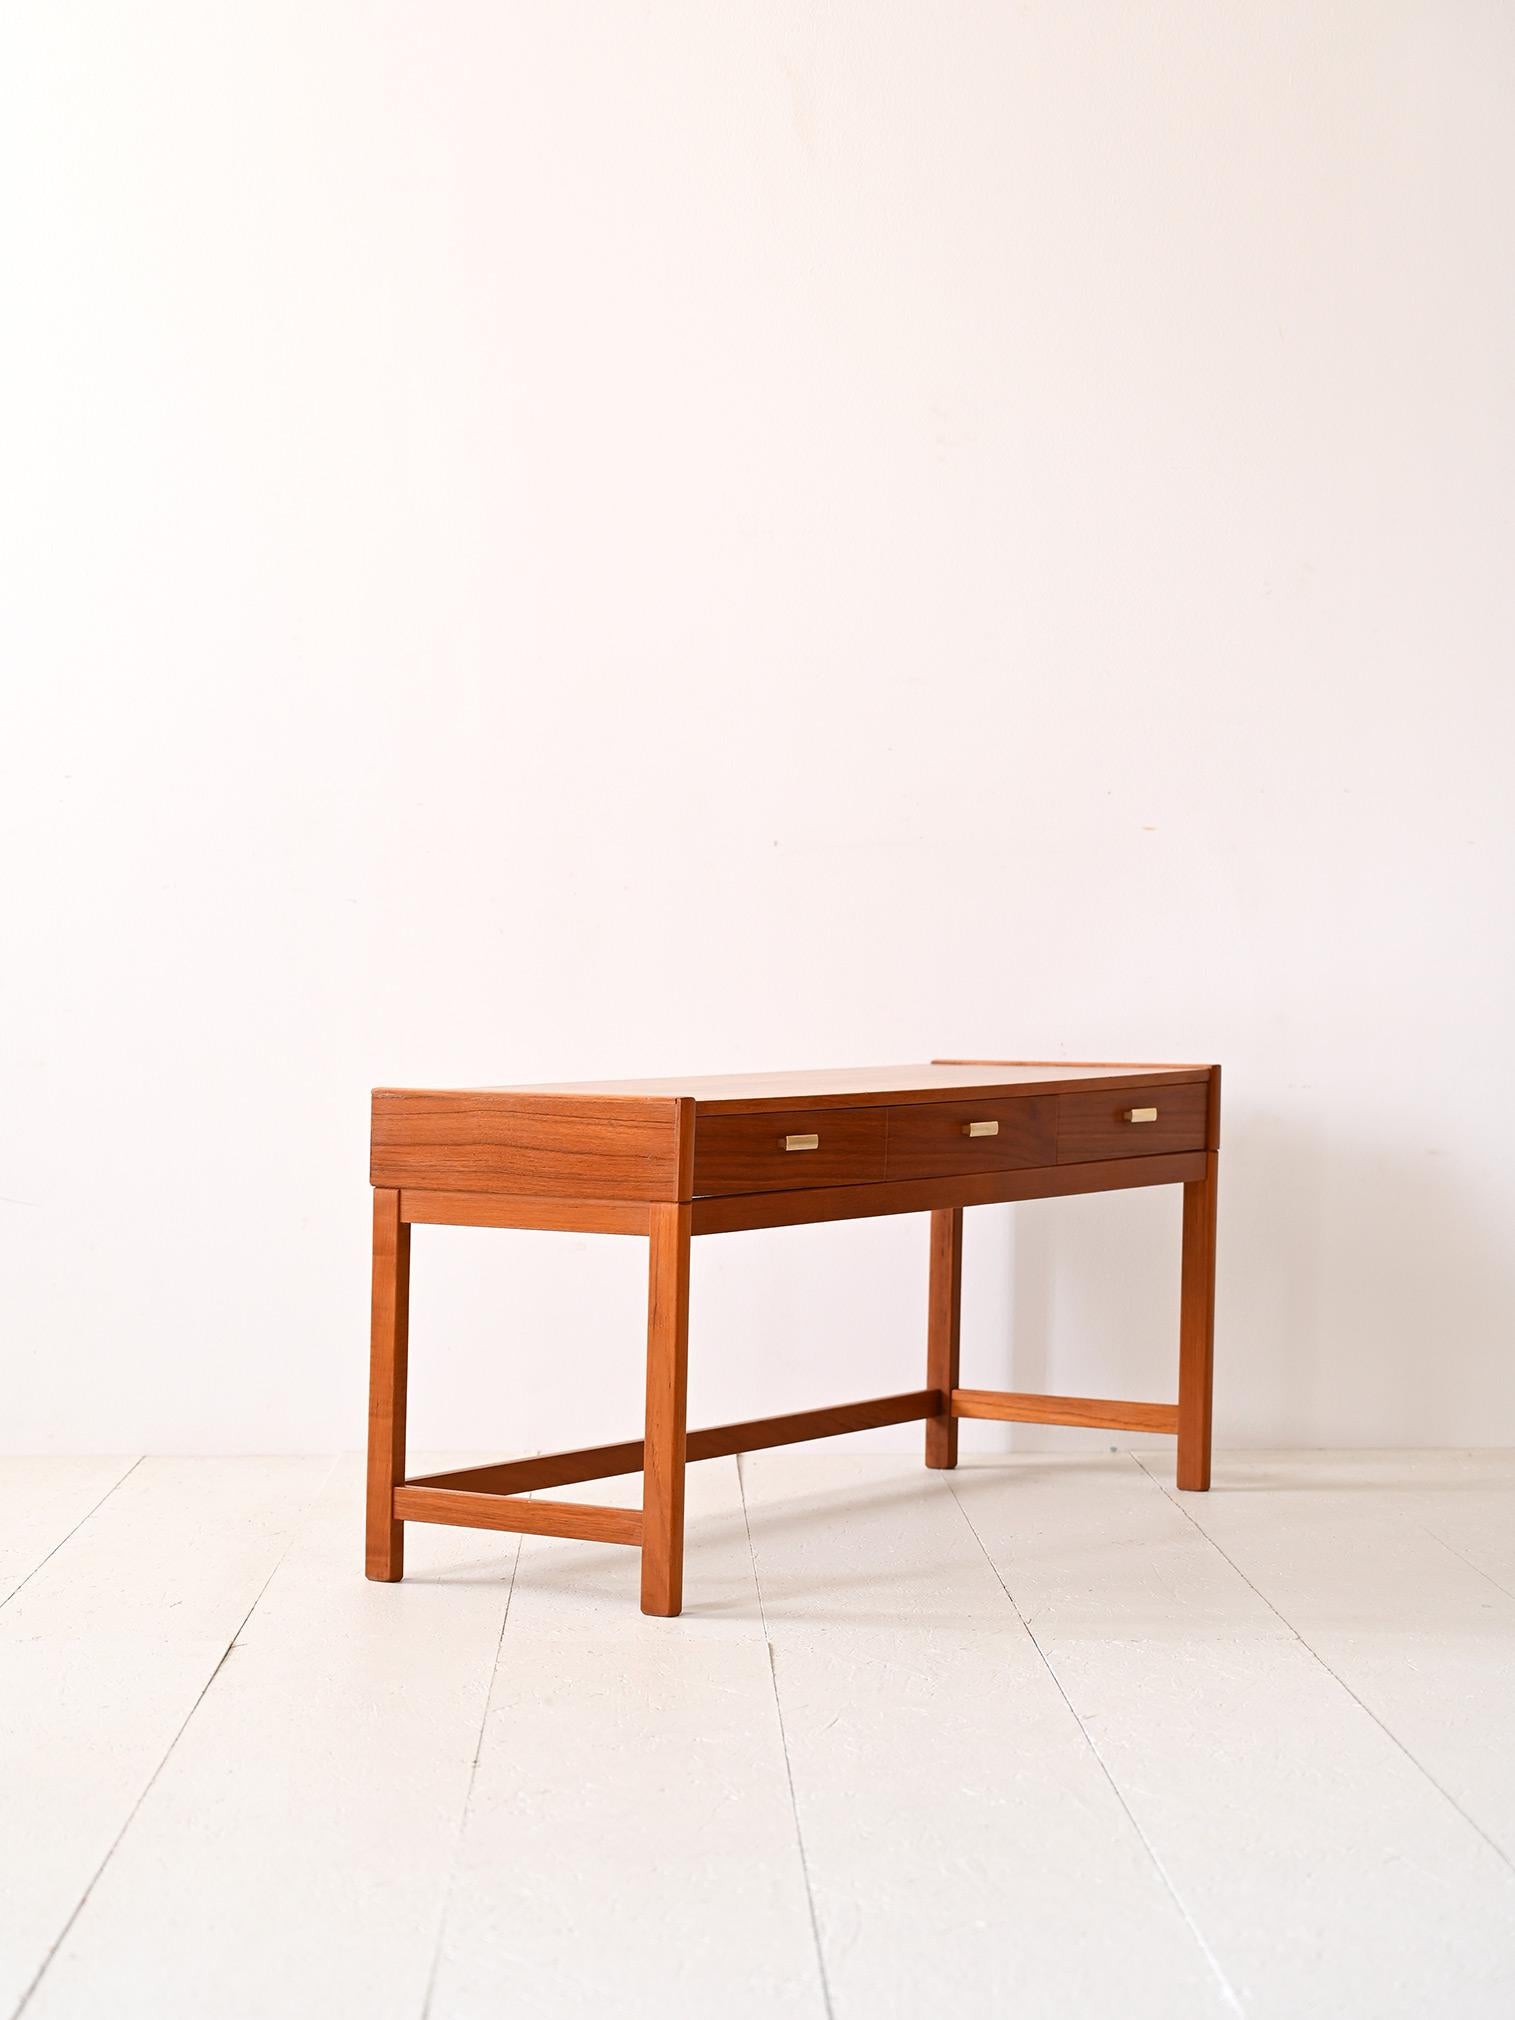 teak console table with drawers